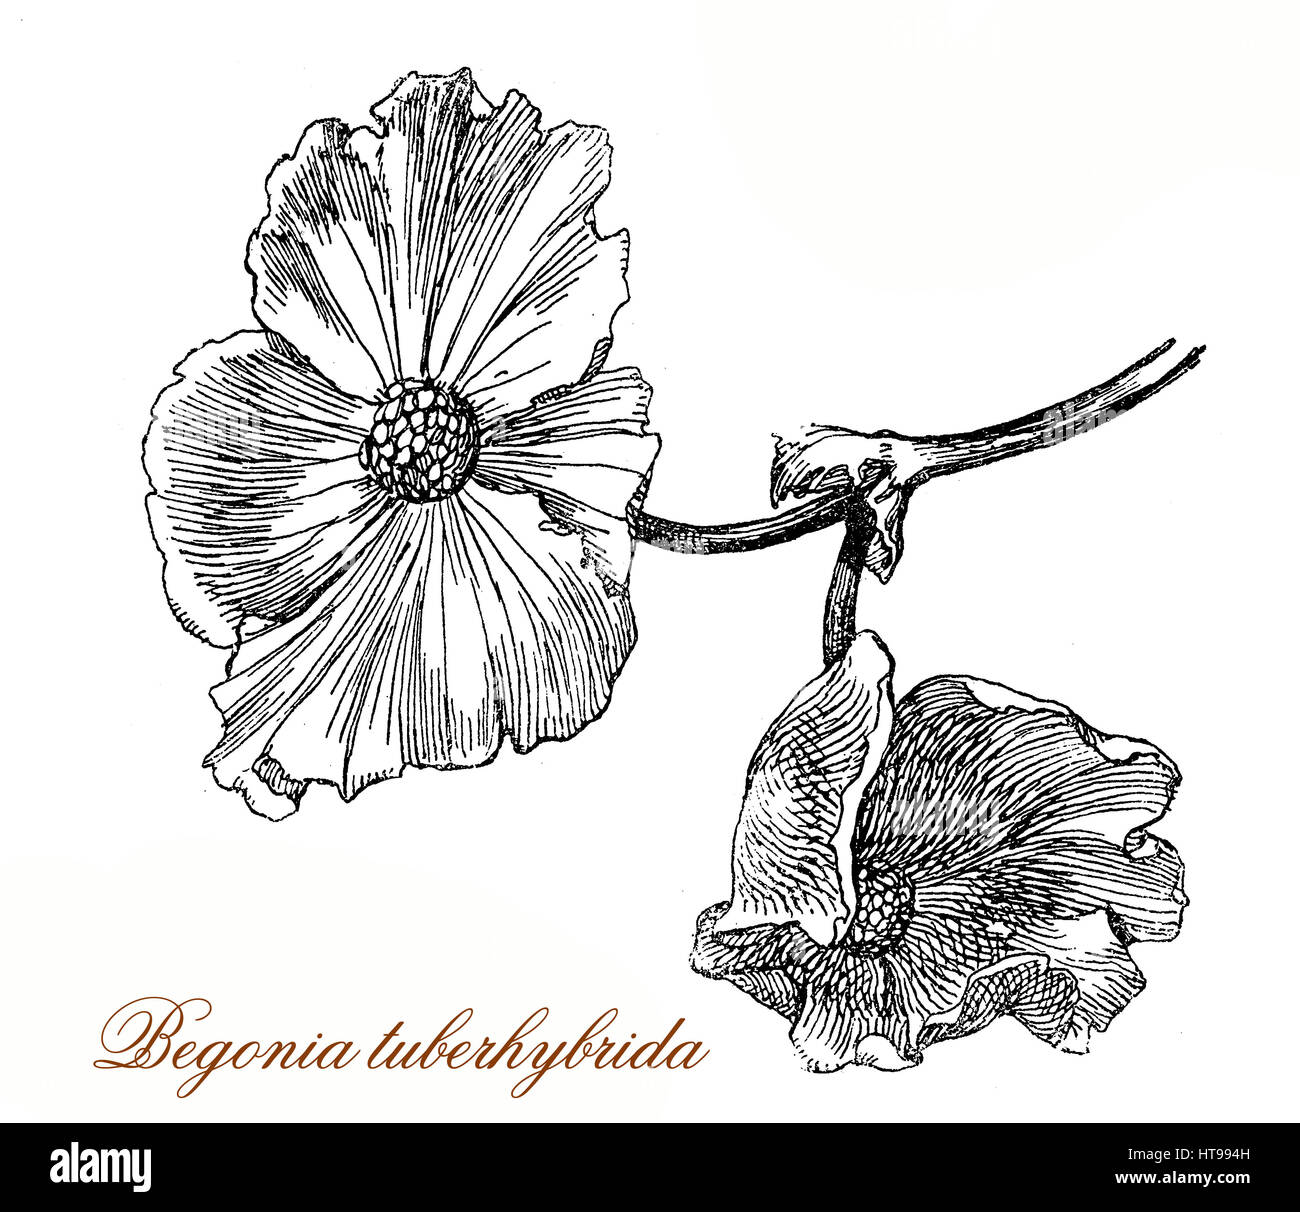 Vintage engraving of begonia × tuberhybrida, ornamental variety named also tuberosa with spectacular flowers Stock Photo